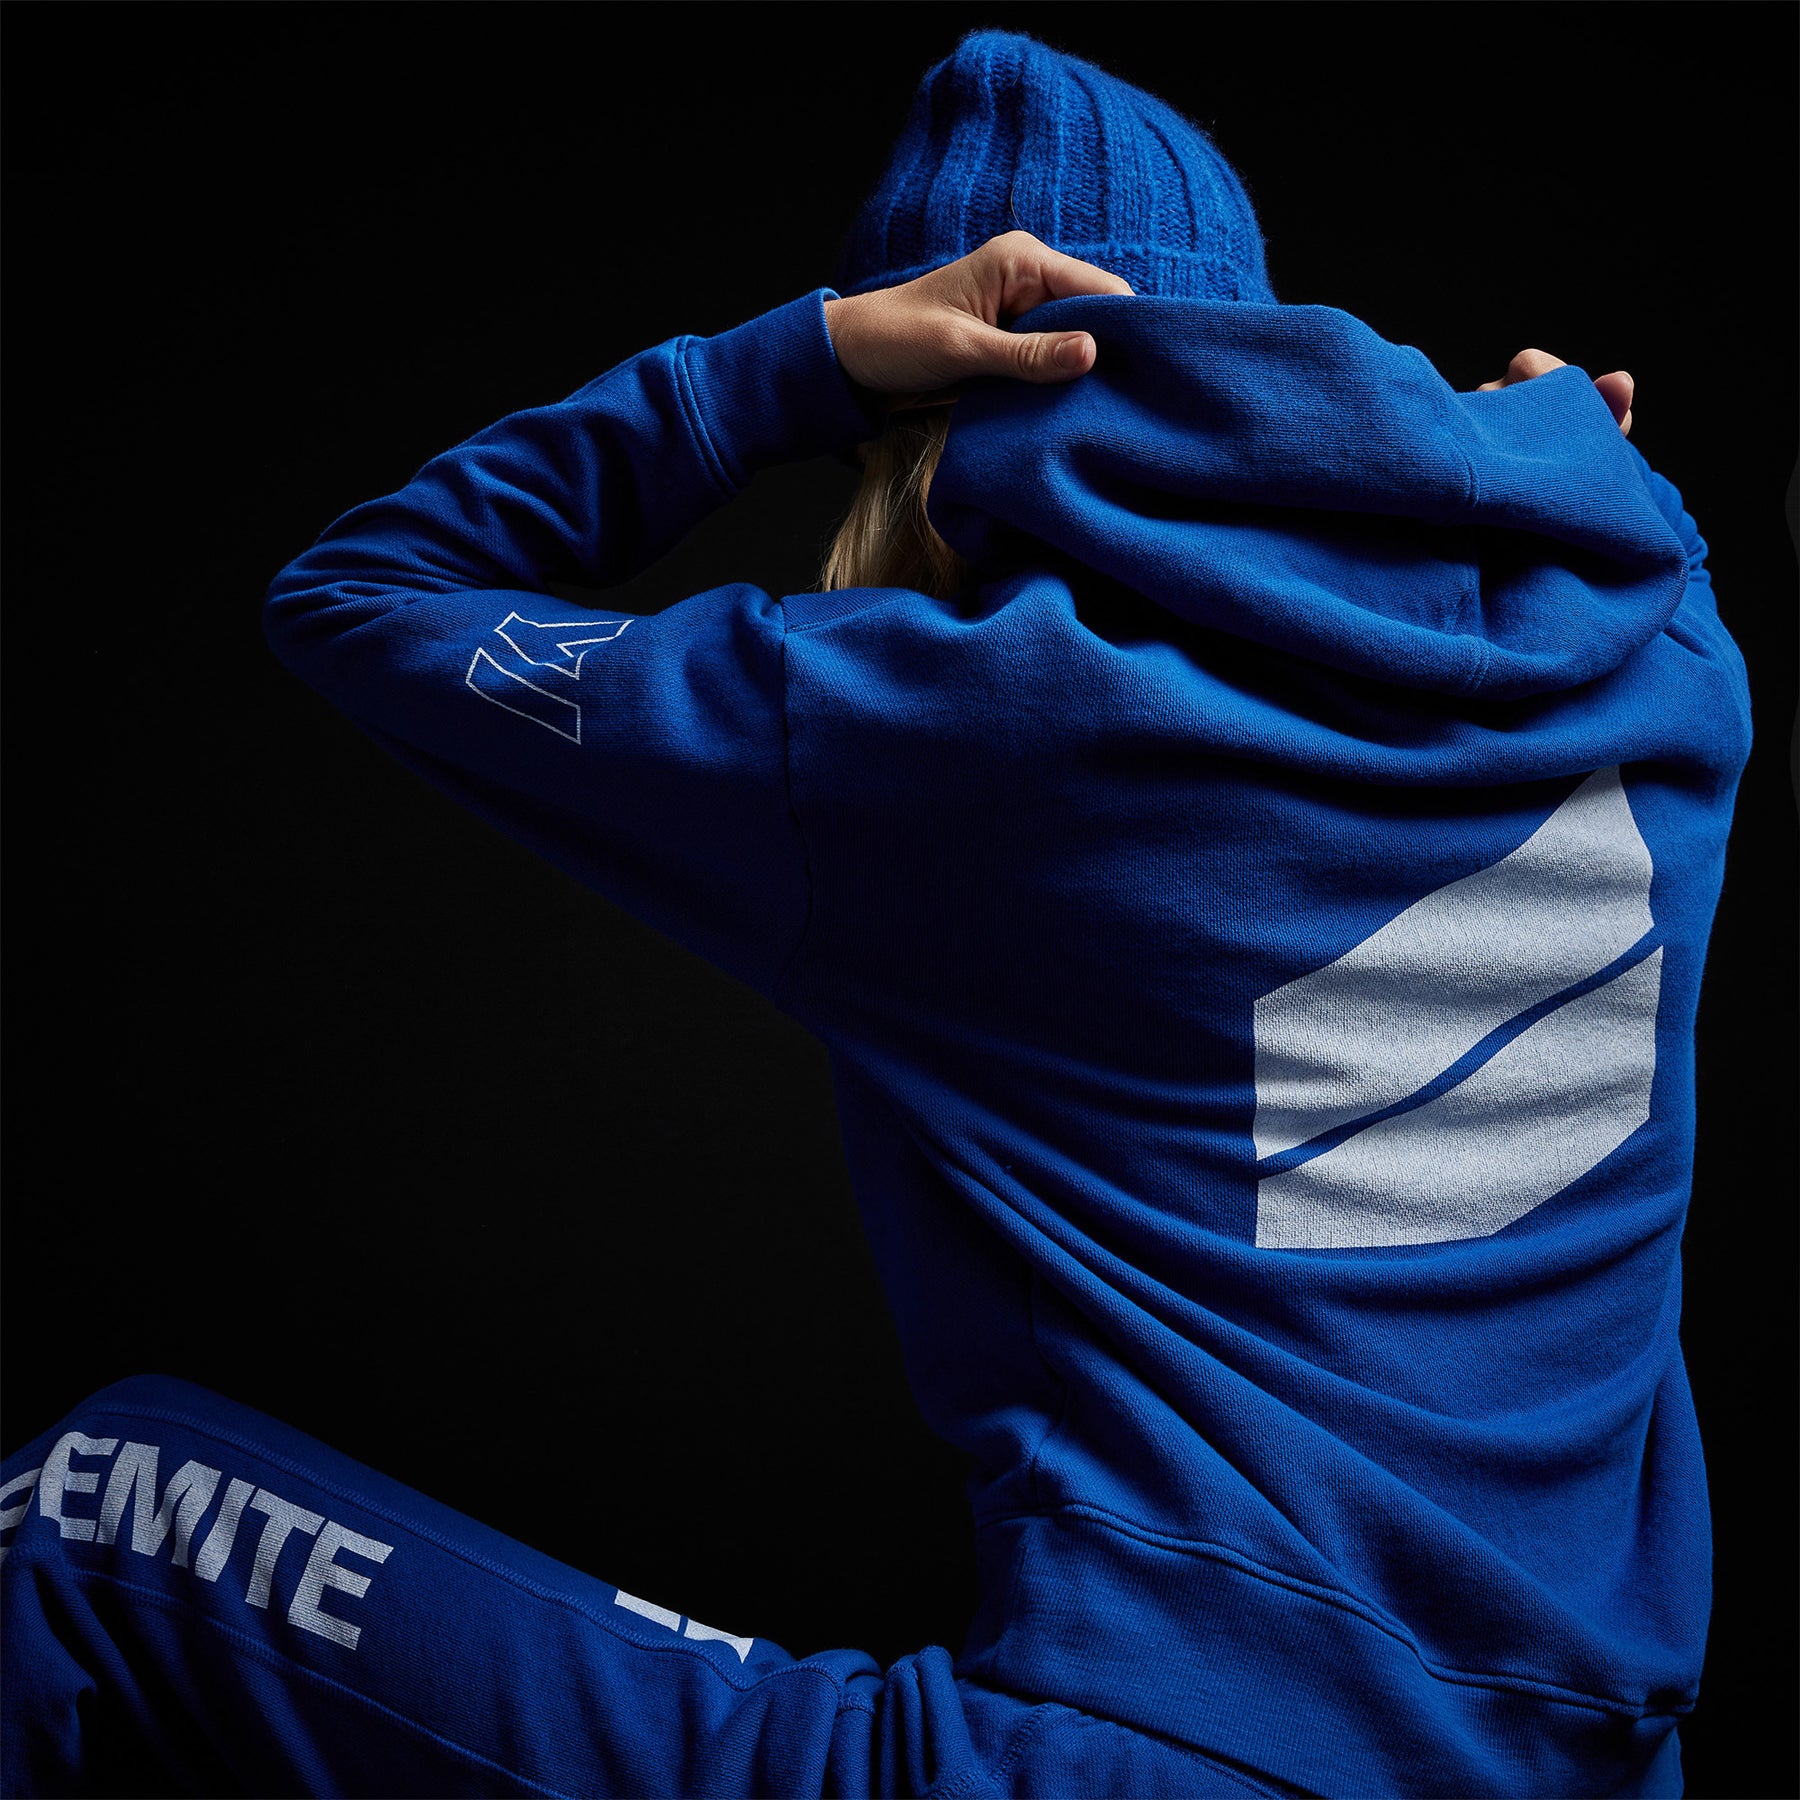 Hoodie | James Blue/White Pullover Graphic Los - Y/OSEMITE Royal Angeles Perse